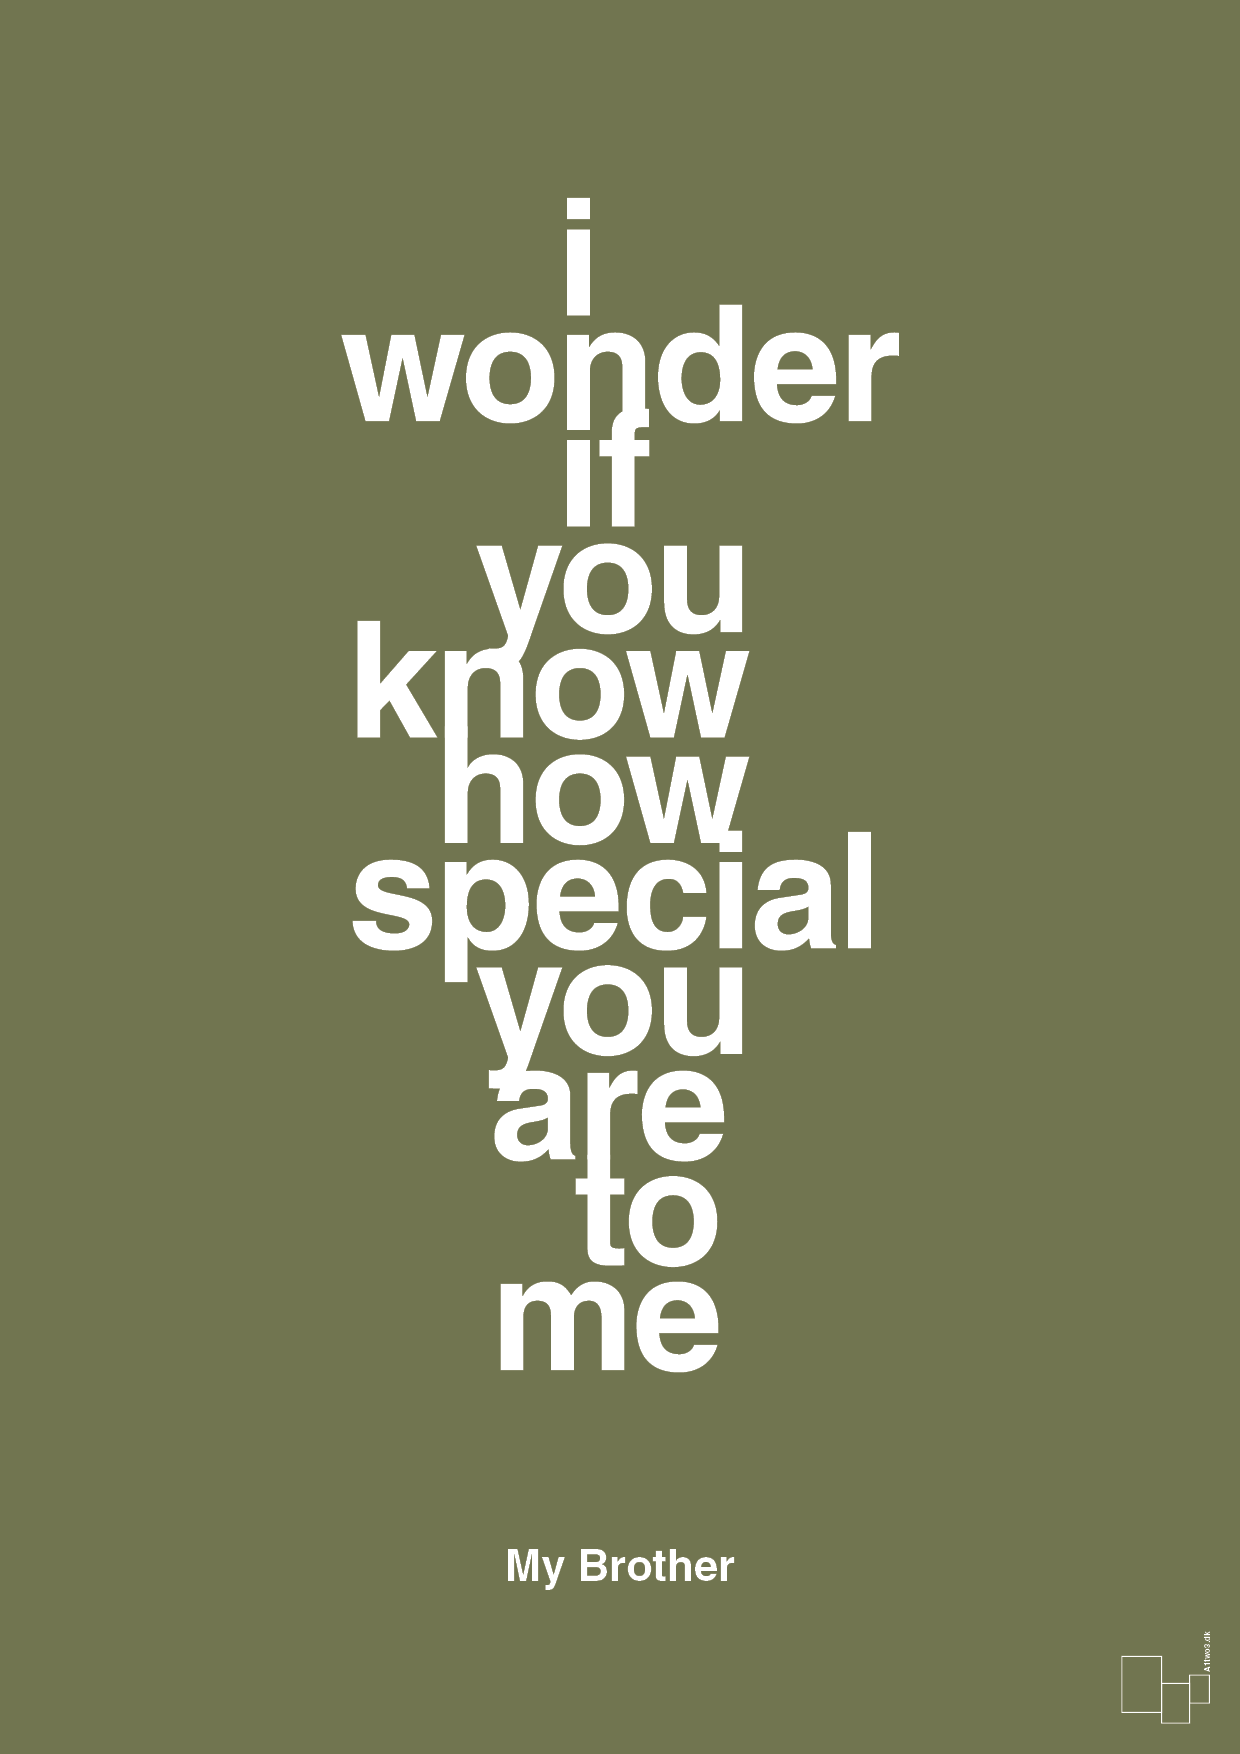 my brother - i wonder if you know how special you are to me - Plakat med Citater i Secret Meadow